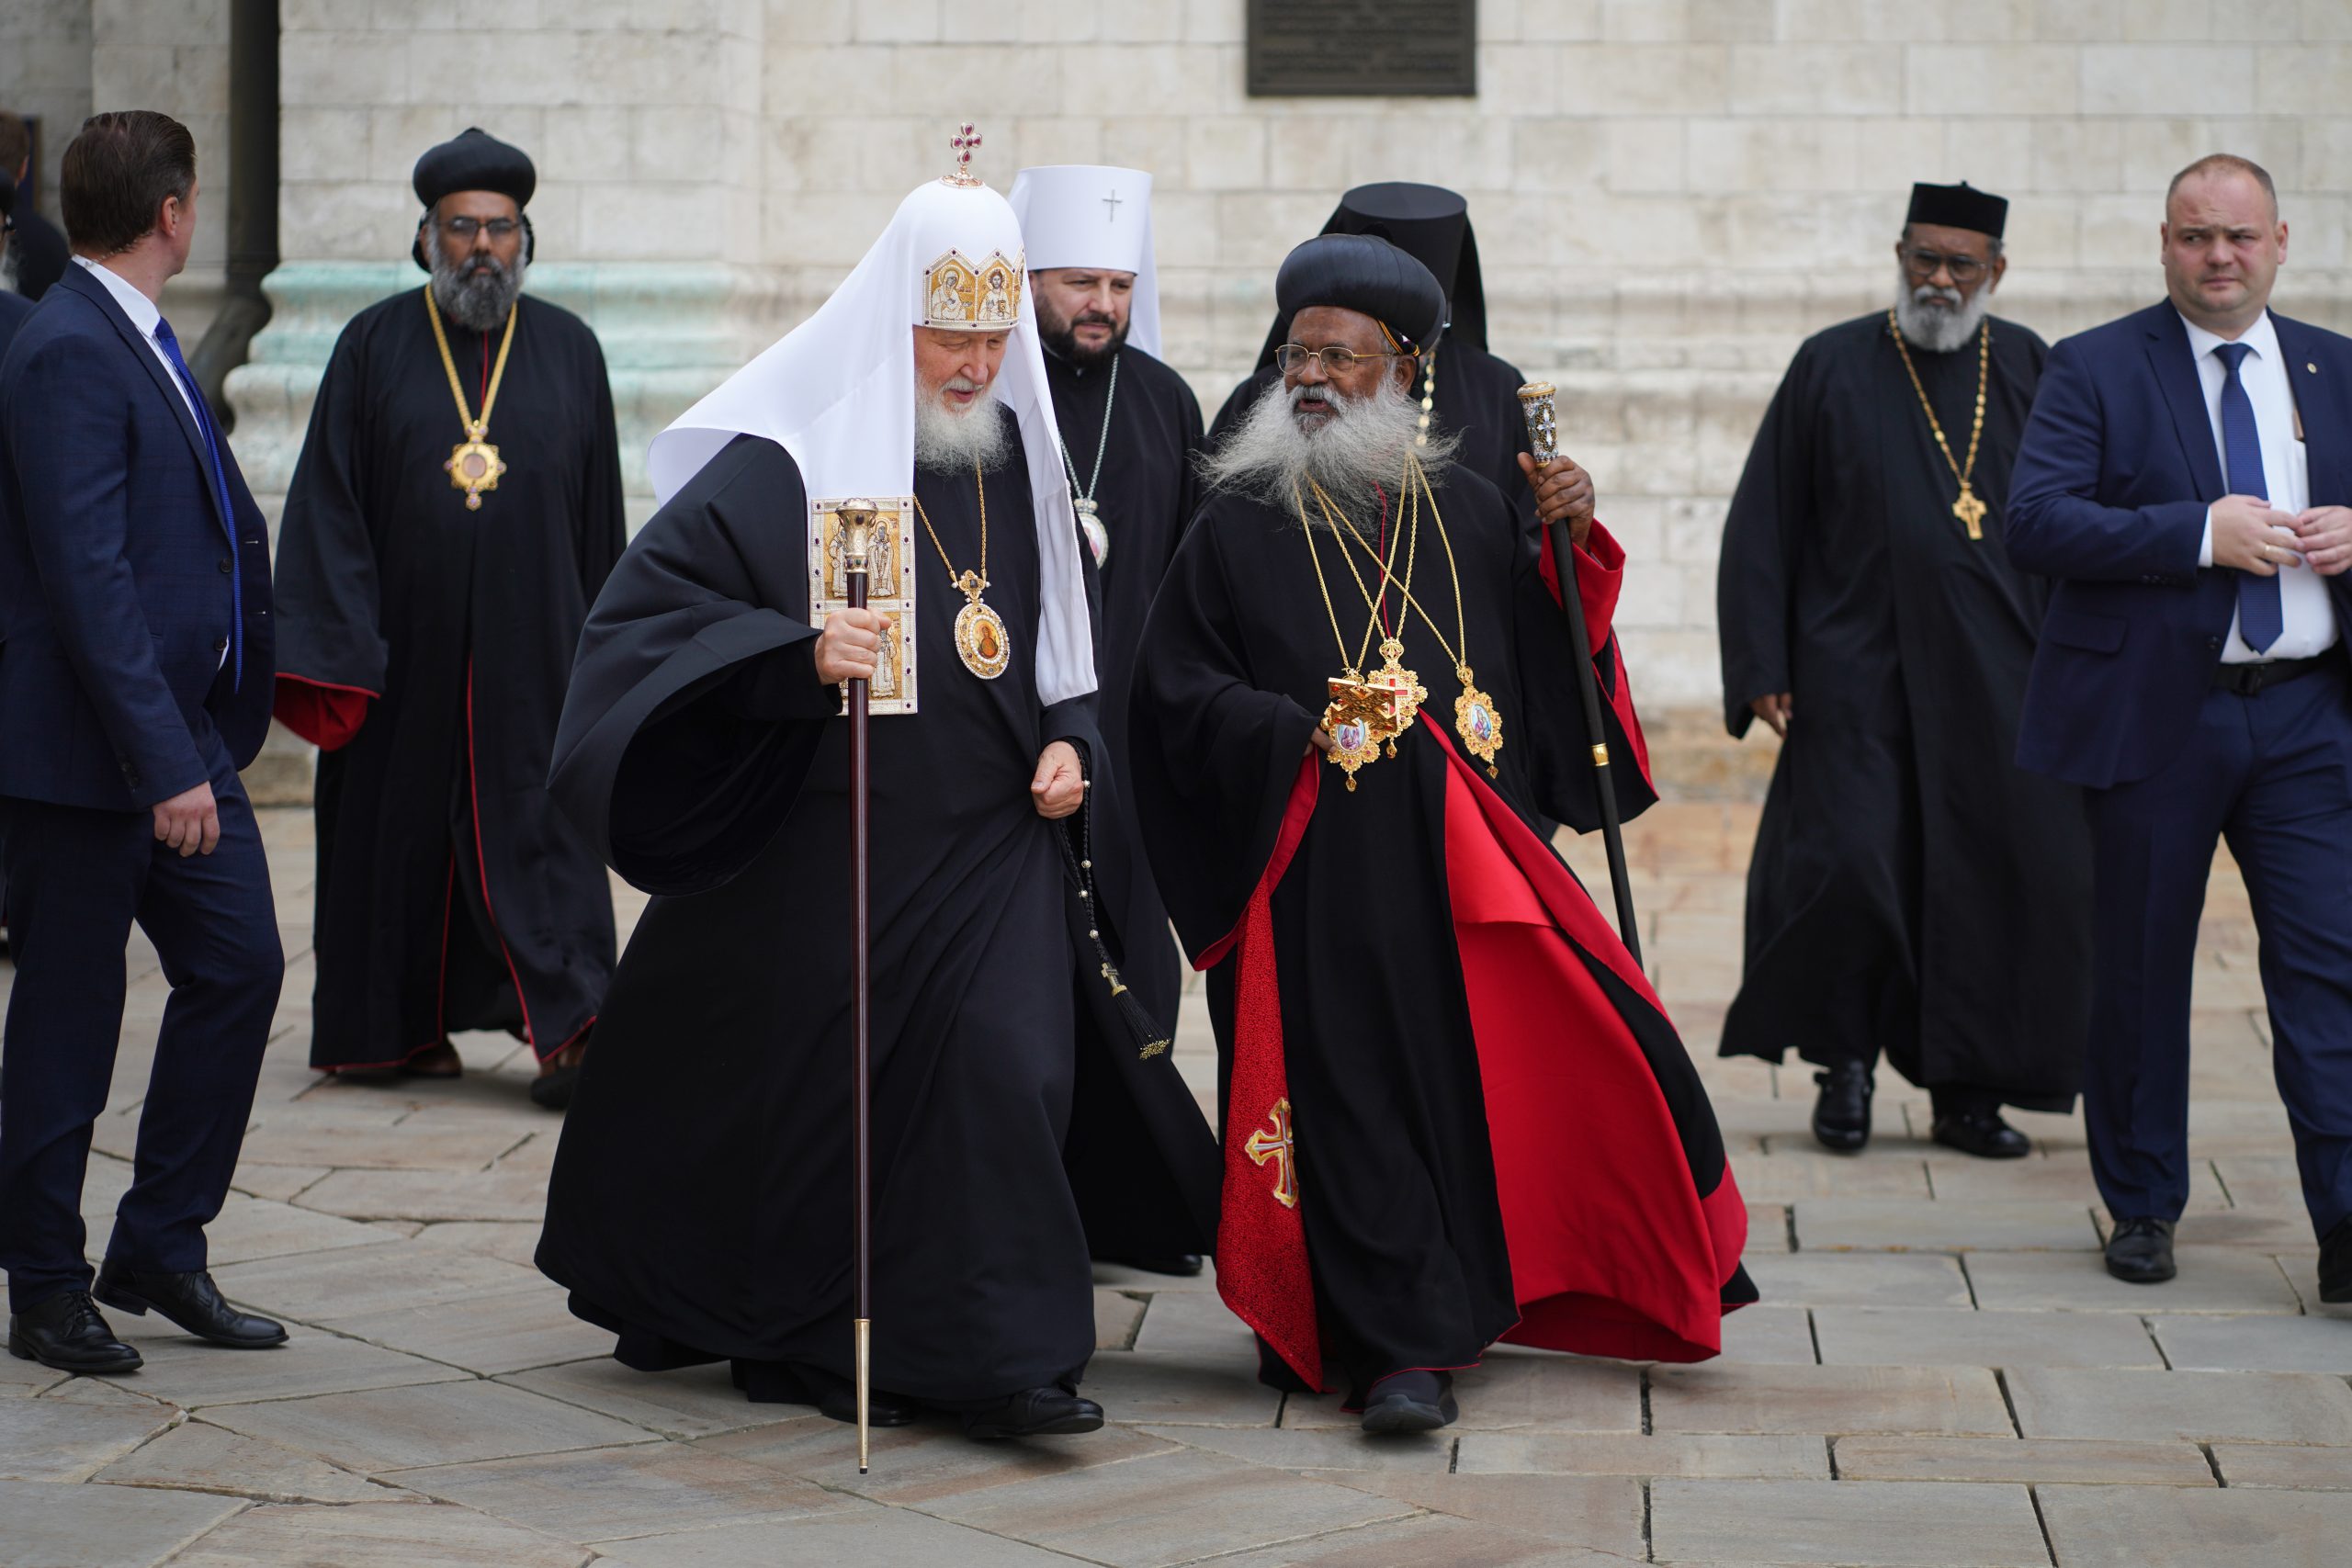 Bilateral Meeting Between Patriarch Kirill and Catholicos Baselios Marthoma Mathews the Third Convened in Moscow